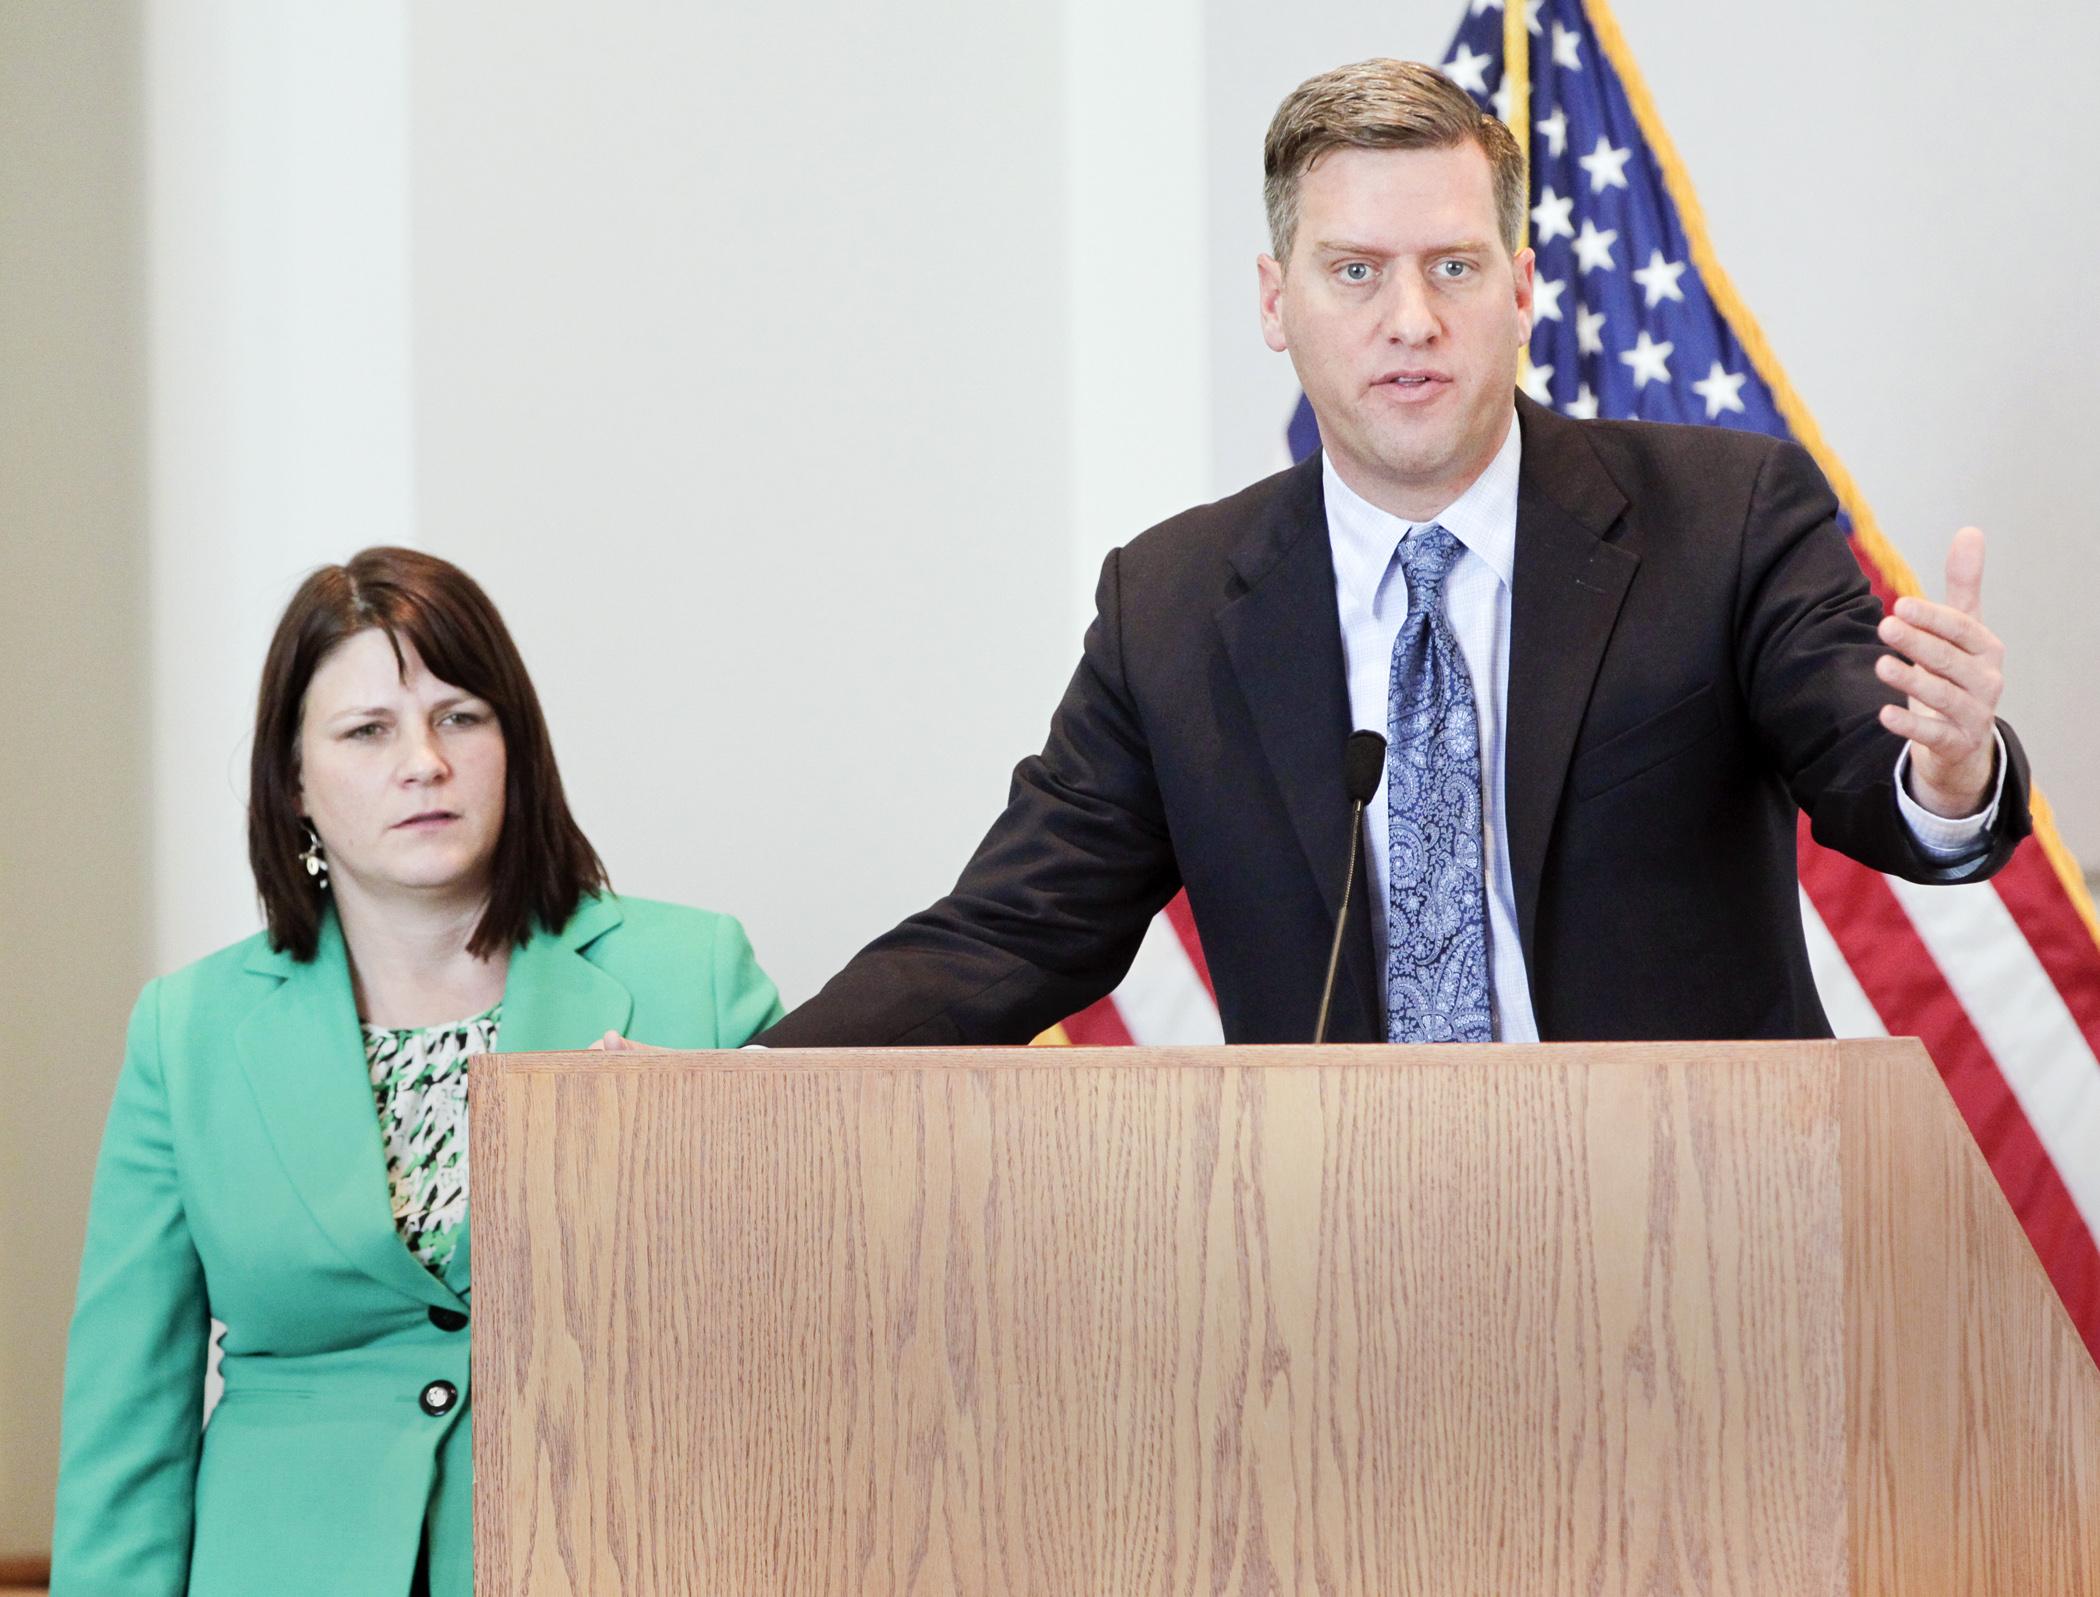 House Speaker Kurt Daudt comments after the November Budget and Economic Forecast was released Dec. as House Majority Leader Joyce Peppin looks on. The forecast projects a $1.87 billion surplus. Photo by Paul Battaglia